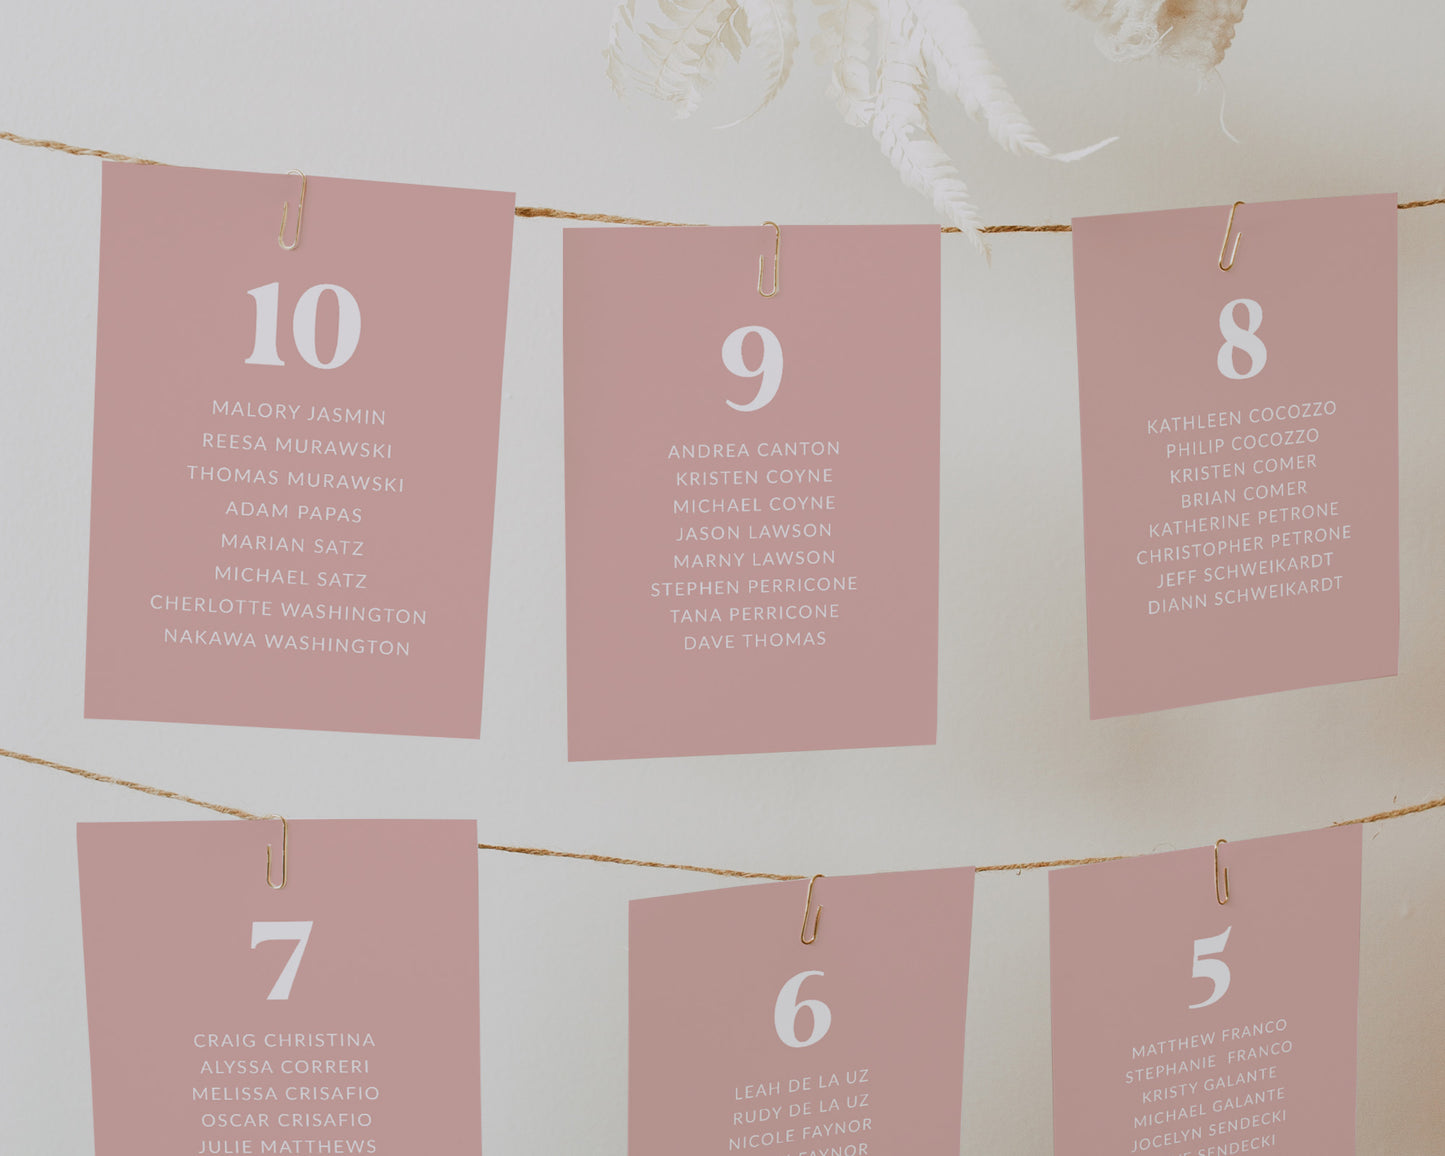 Seating Chart Table Cards